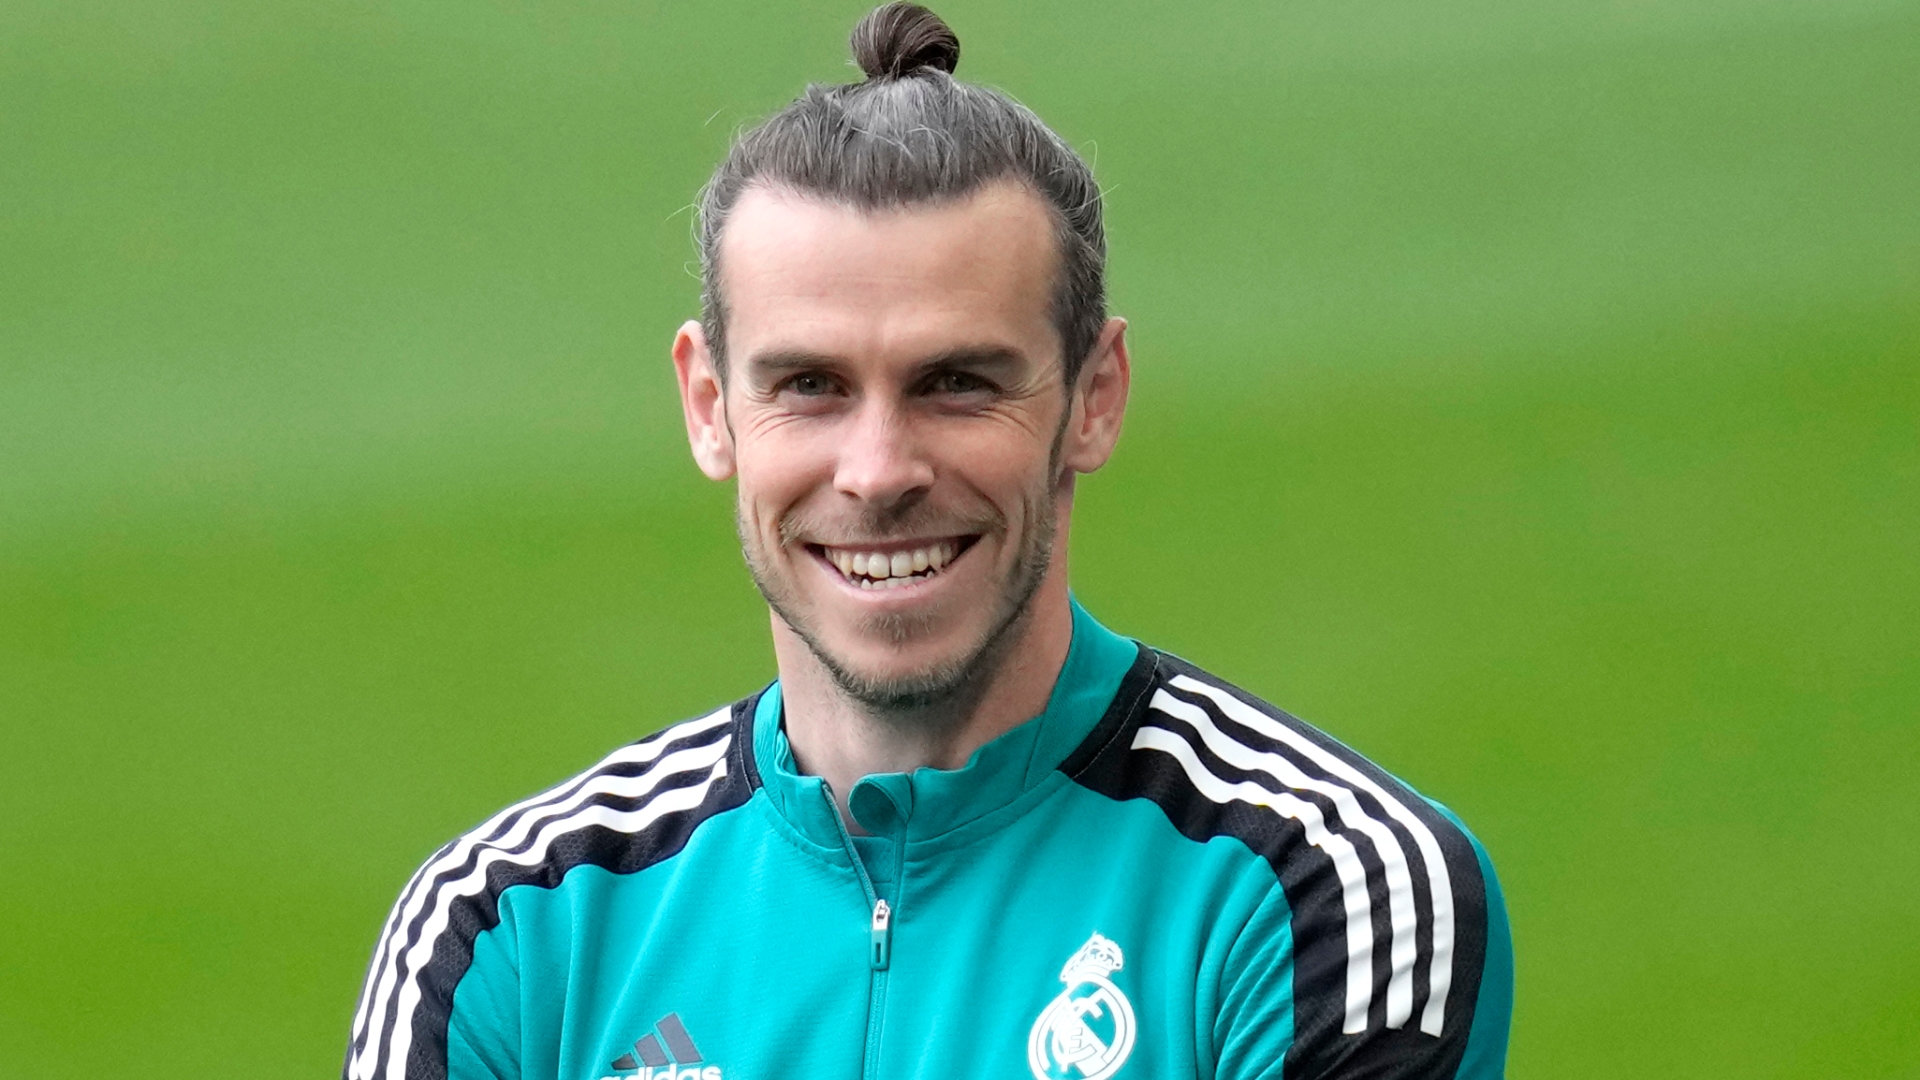 Gareth Bale granted permission to open controversial golf-themed bar after agreeing to reduce its opening hours